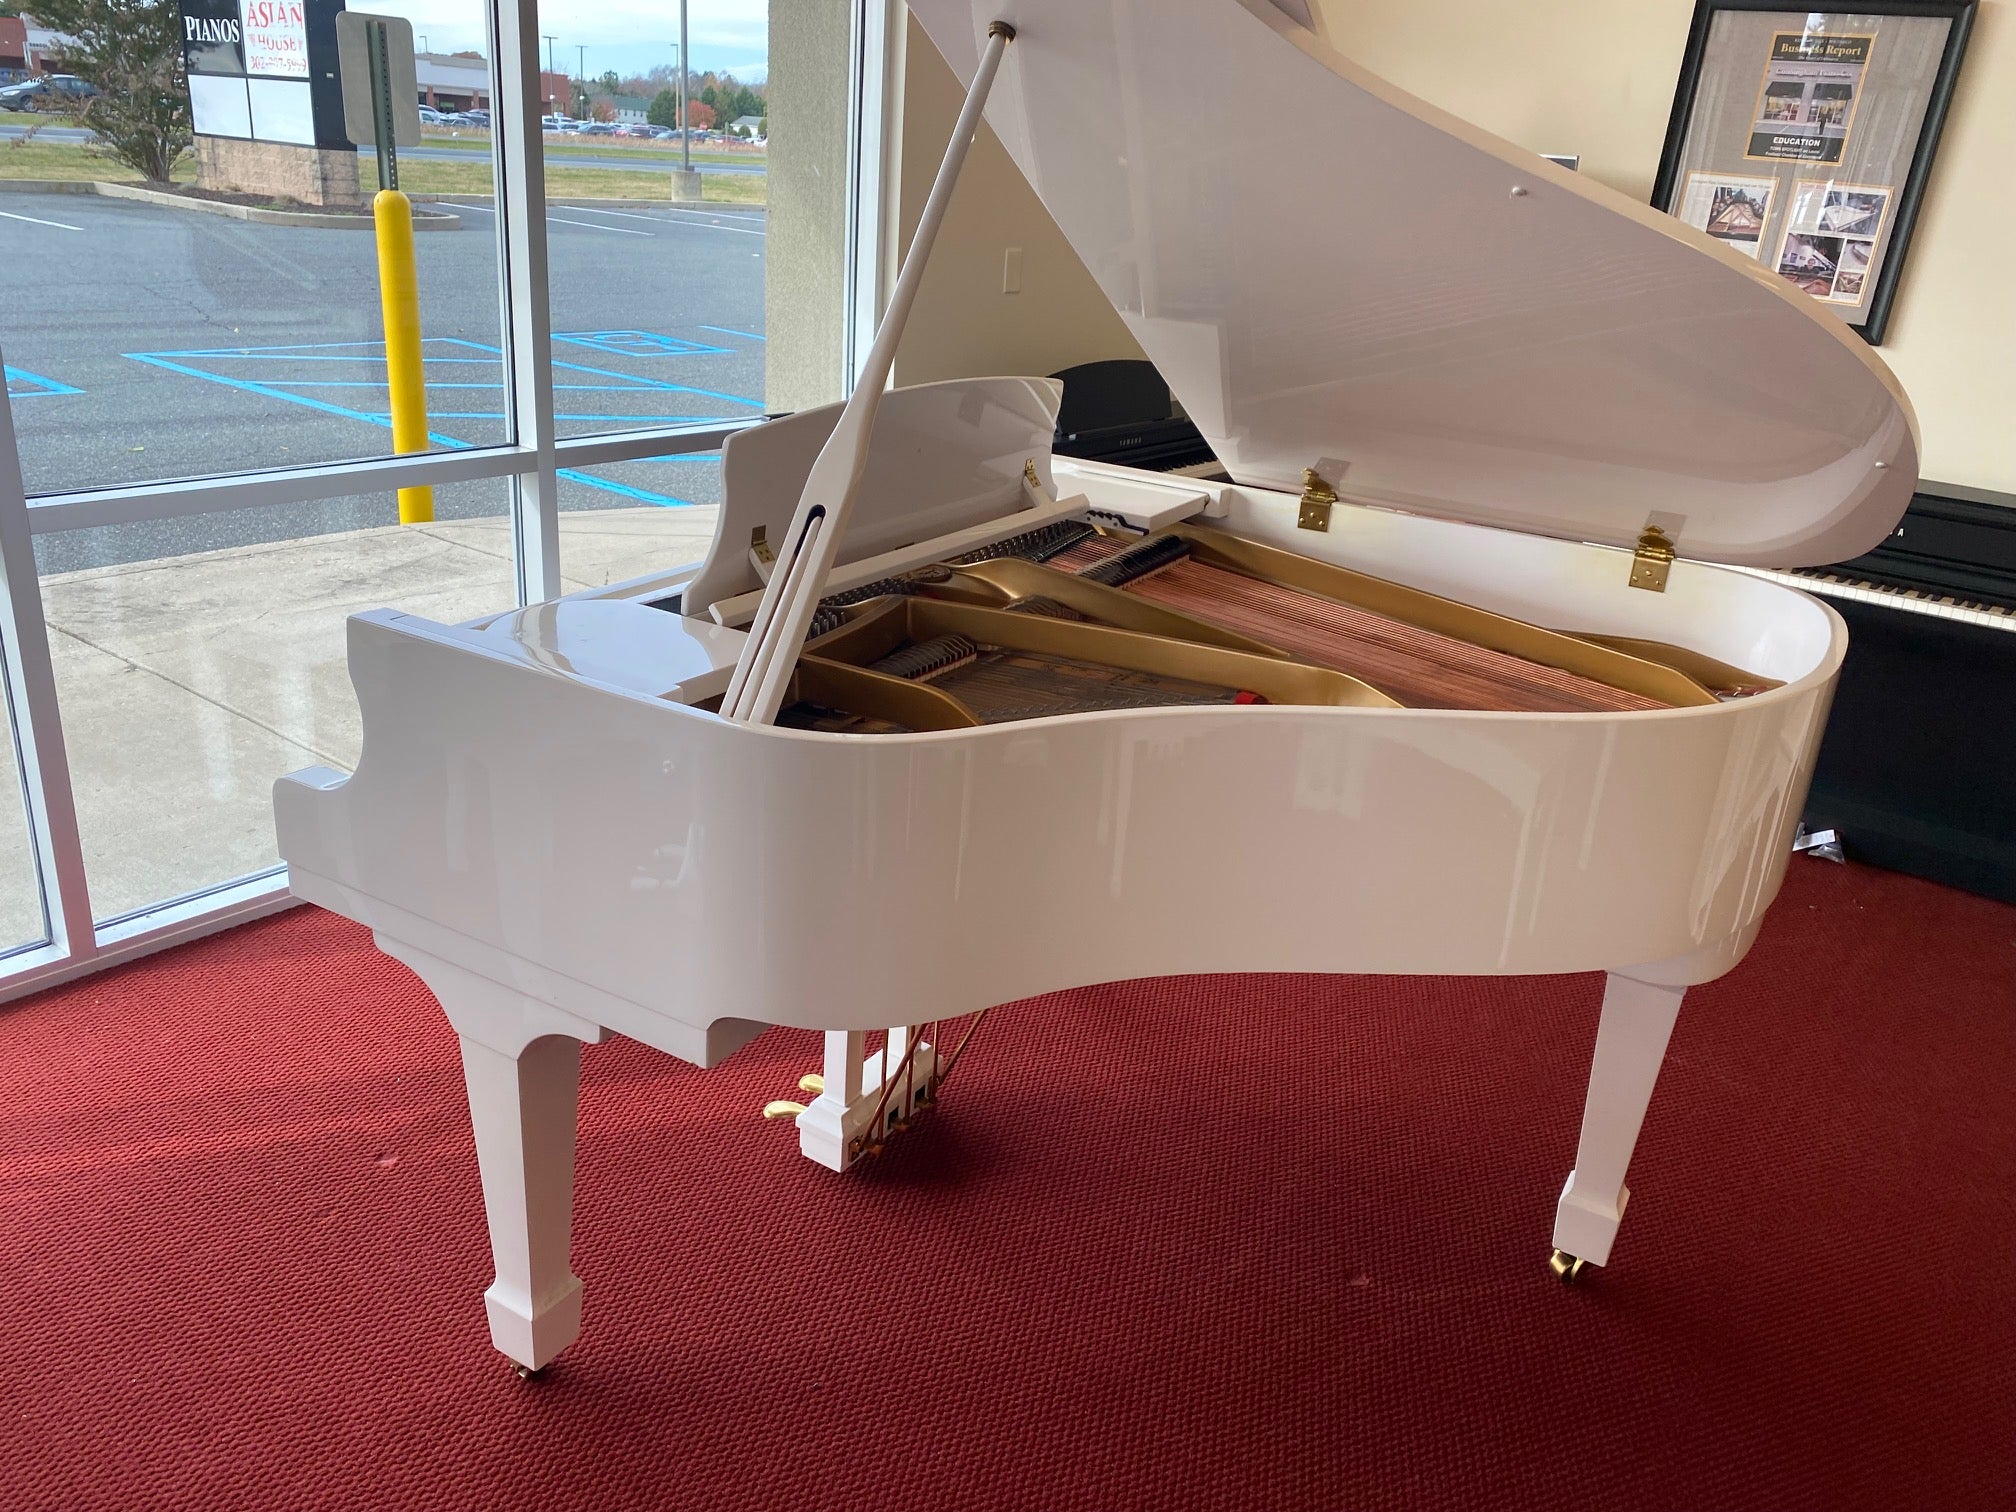 Kohler & Campbell SGK-500WH 5' Baby Grand Piano in Polished White Finish